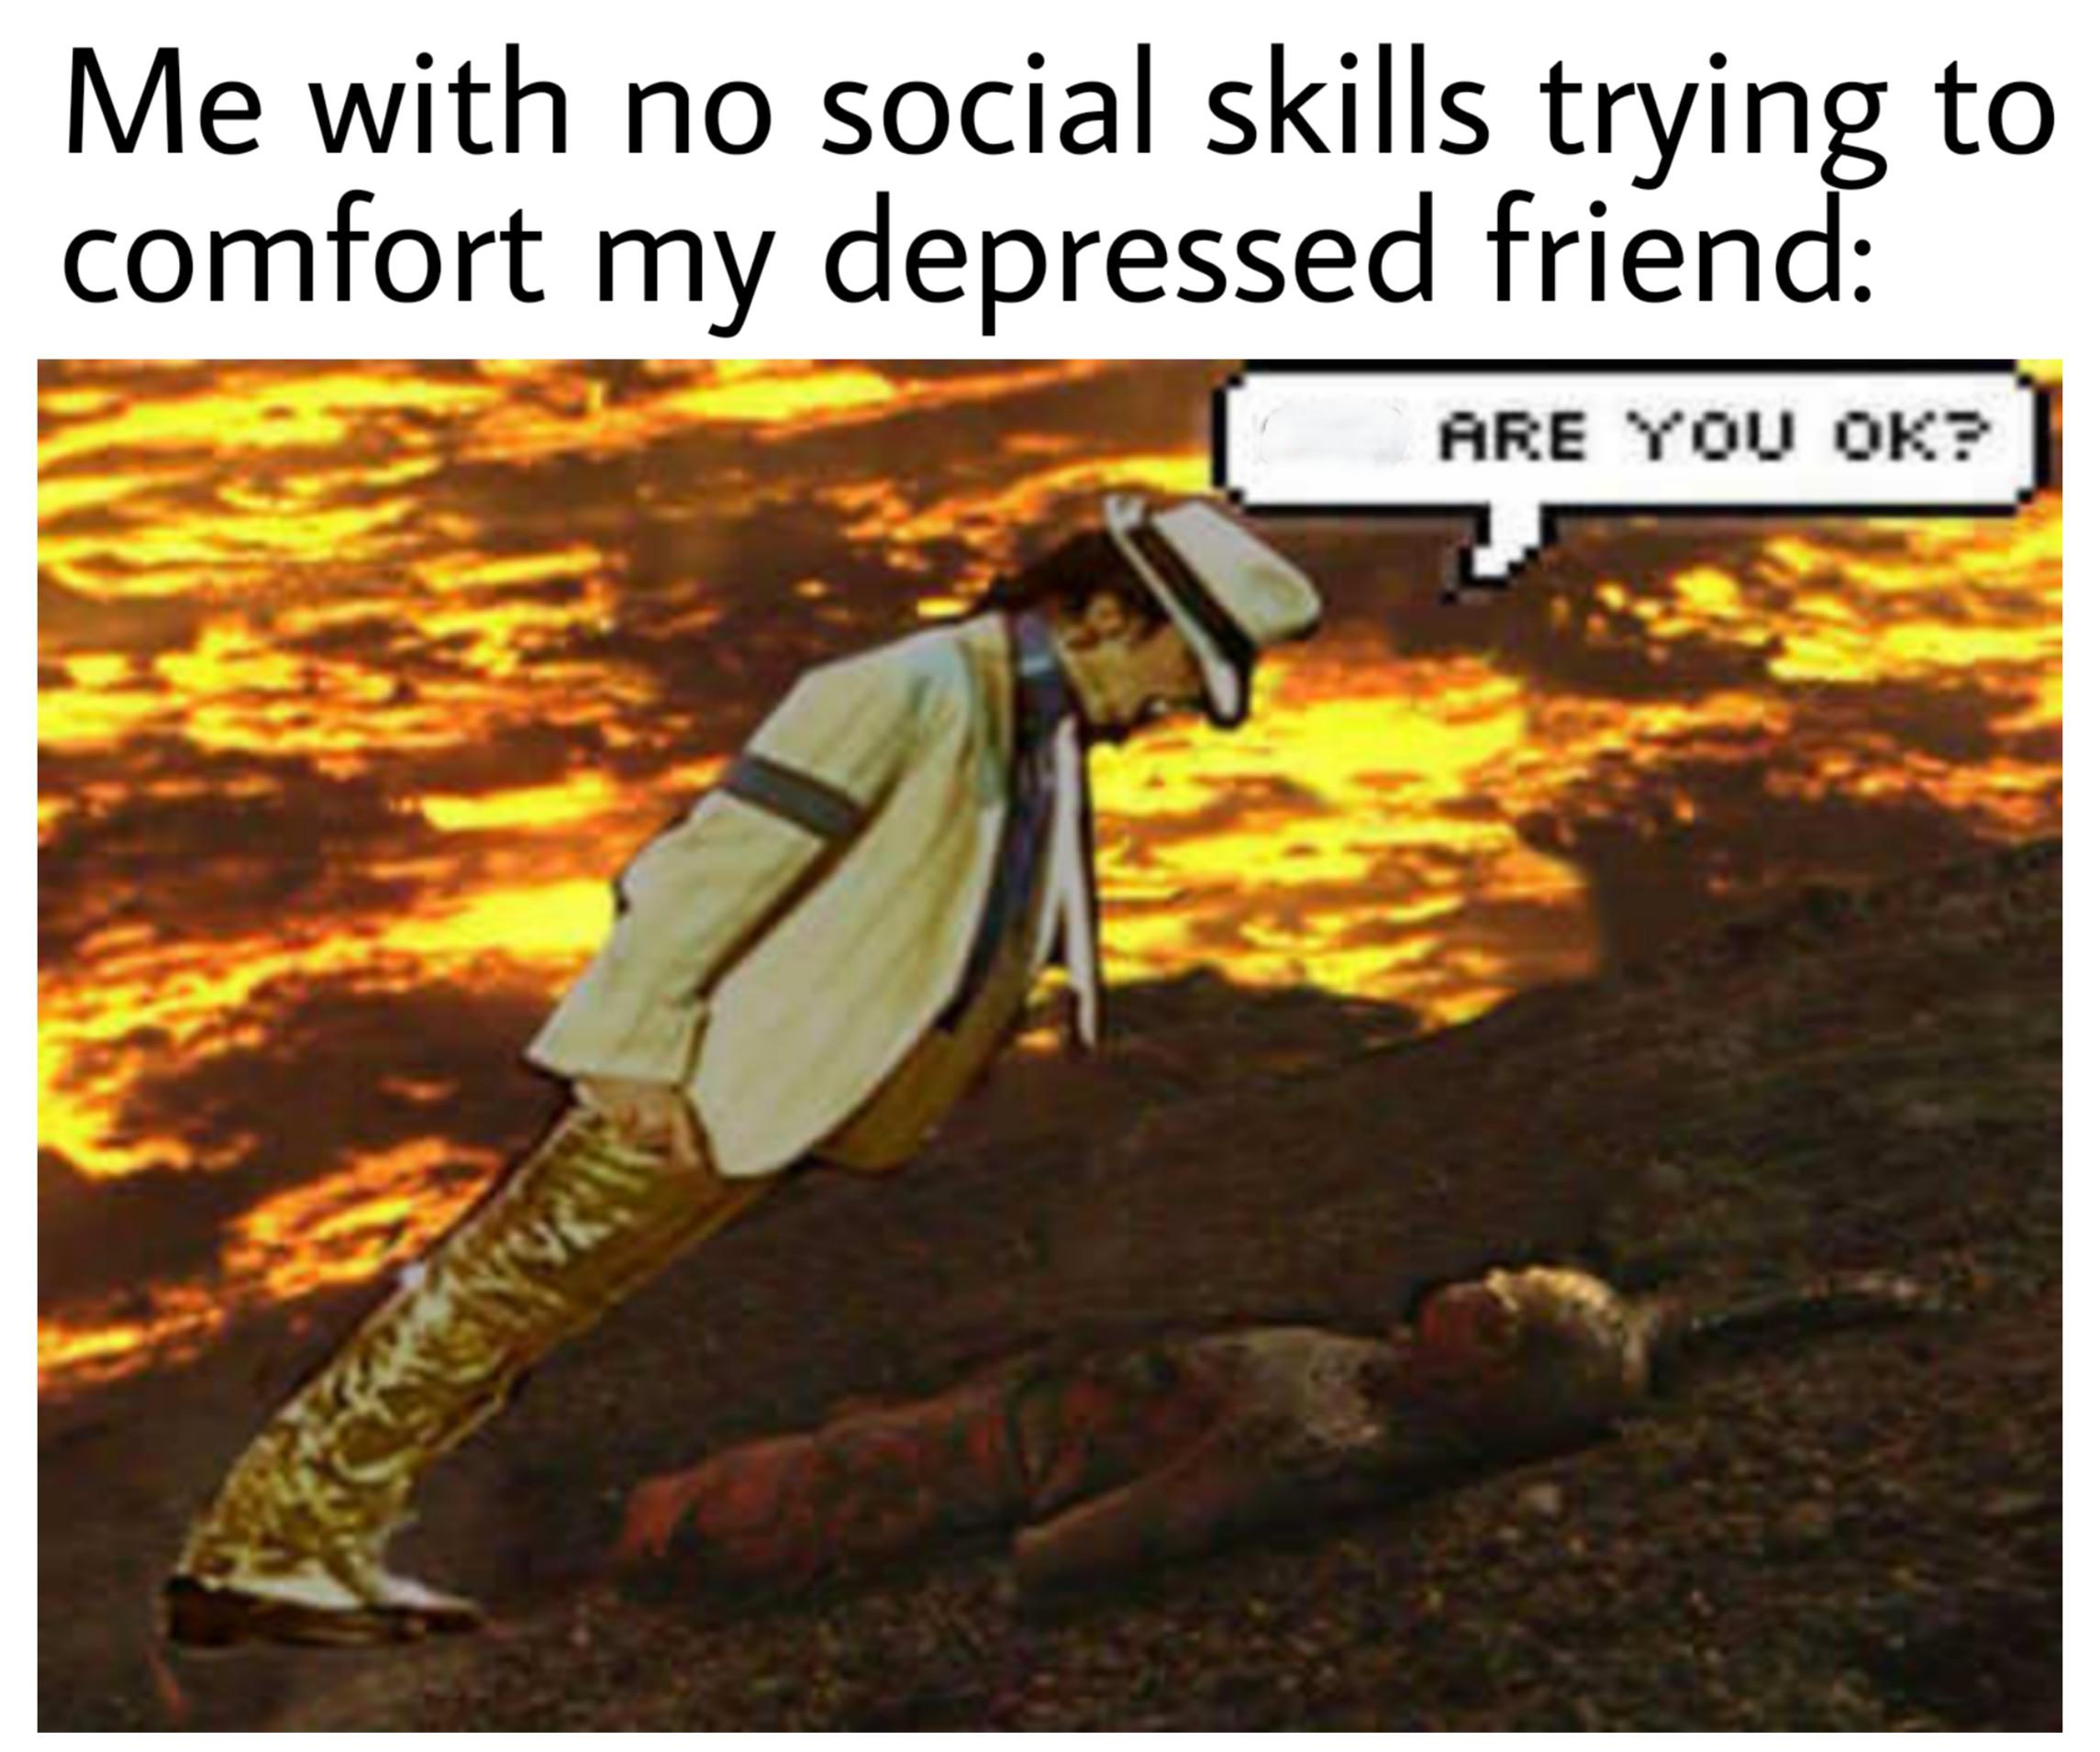 star wars ani are you ok - Me with no social skills trying to comfort my depressed friend Are You Ok?